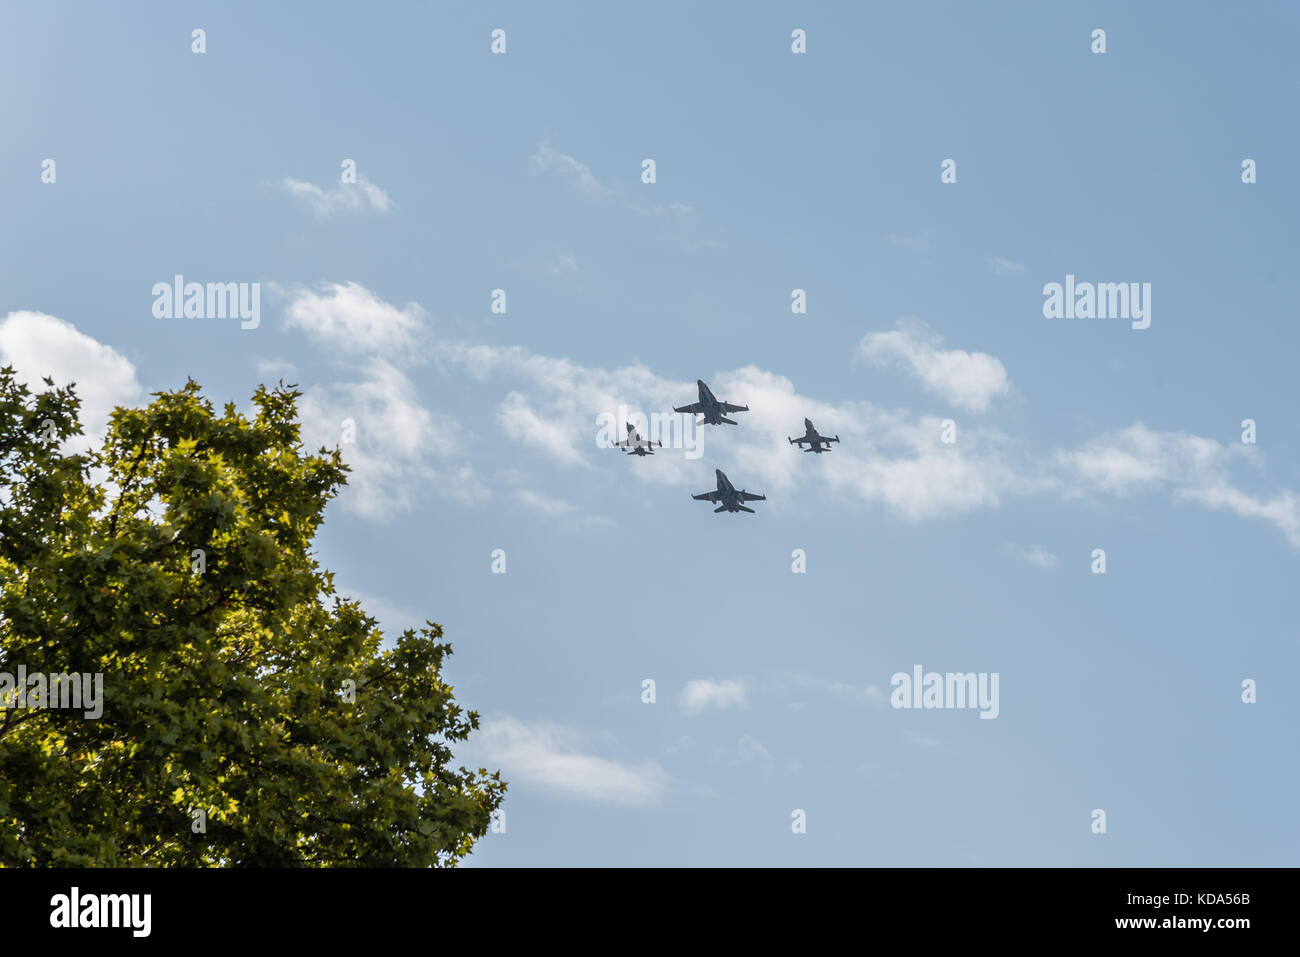 Madrid, Spain - October 12, 2017: Two F18 Hornet and two F5 jet fighters flying in Spanish National Day Parade. Several troops take part in the army parade for Spain's National Day. King Felipe VI, Queen Letizia and Spanish Prime Minister Mariano Rajoy presided over the parade. Juan Jimenez/Alamy Live News Stock Photo